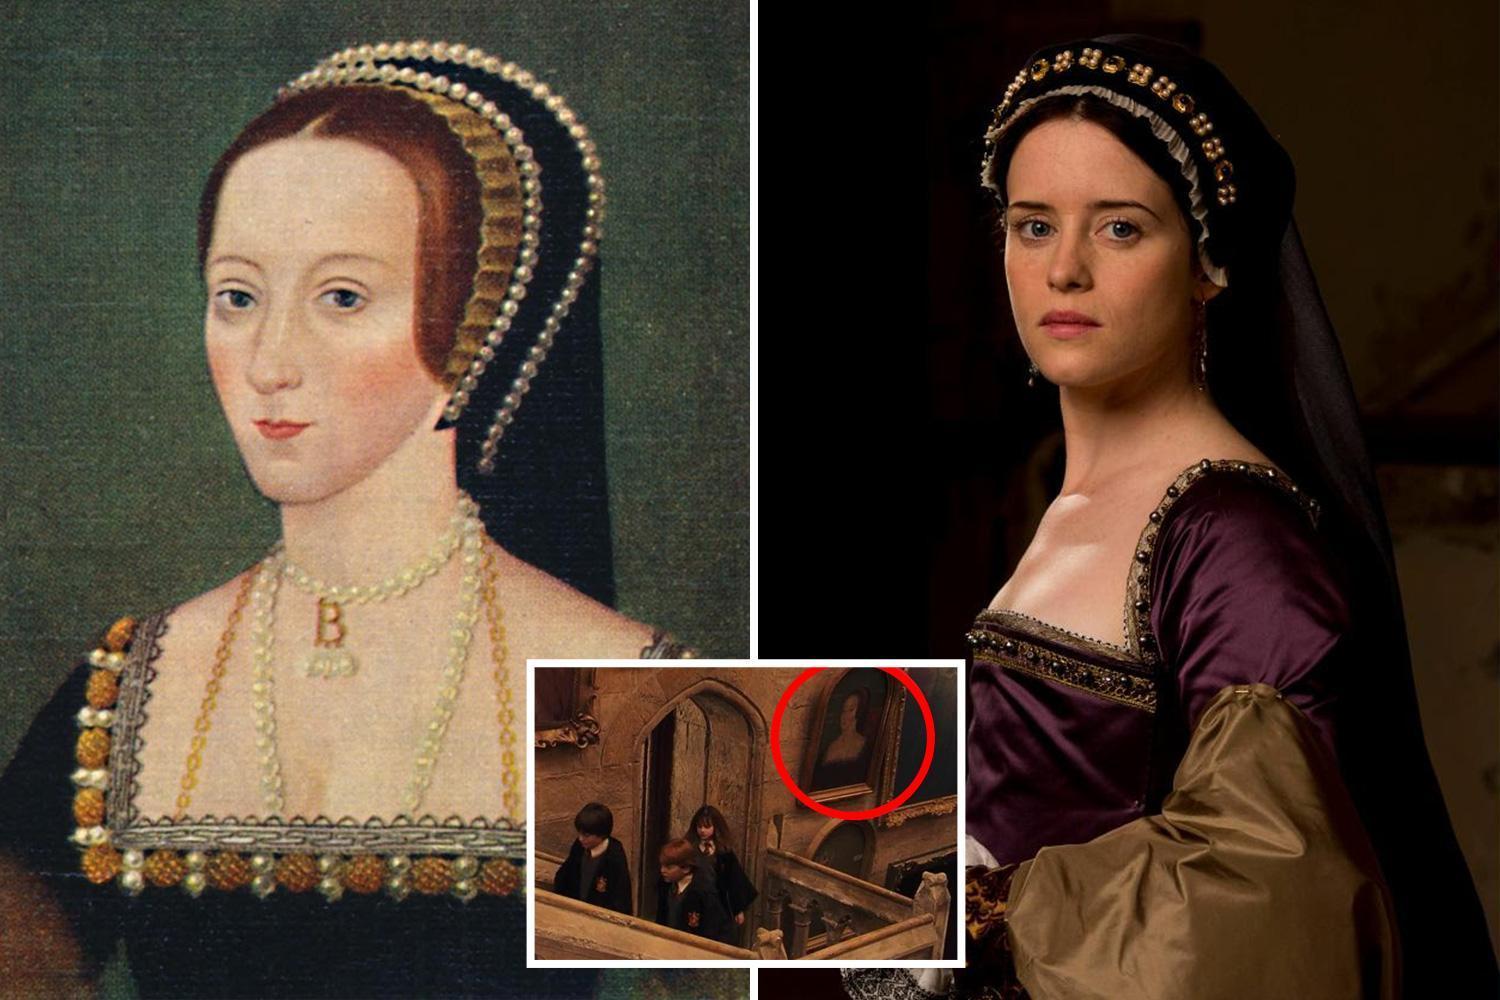 Anne Boleyn facts five fascinating things you didn't know about Henry VIII's second wife